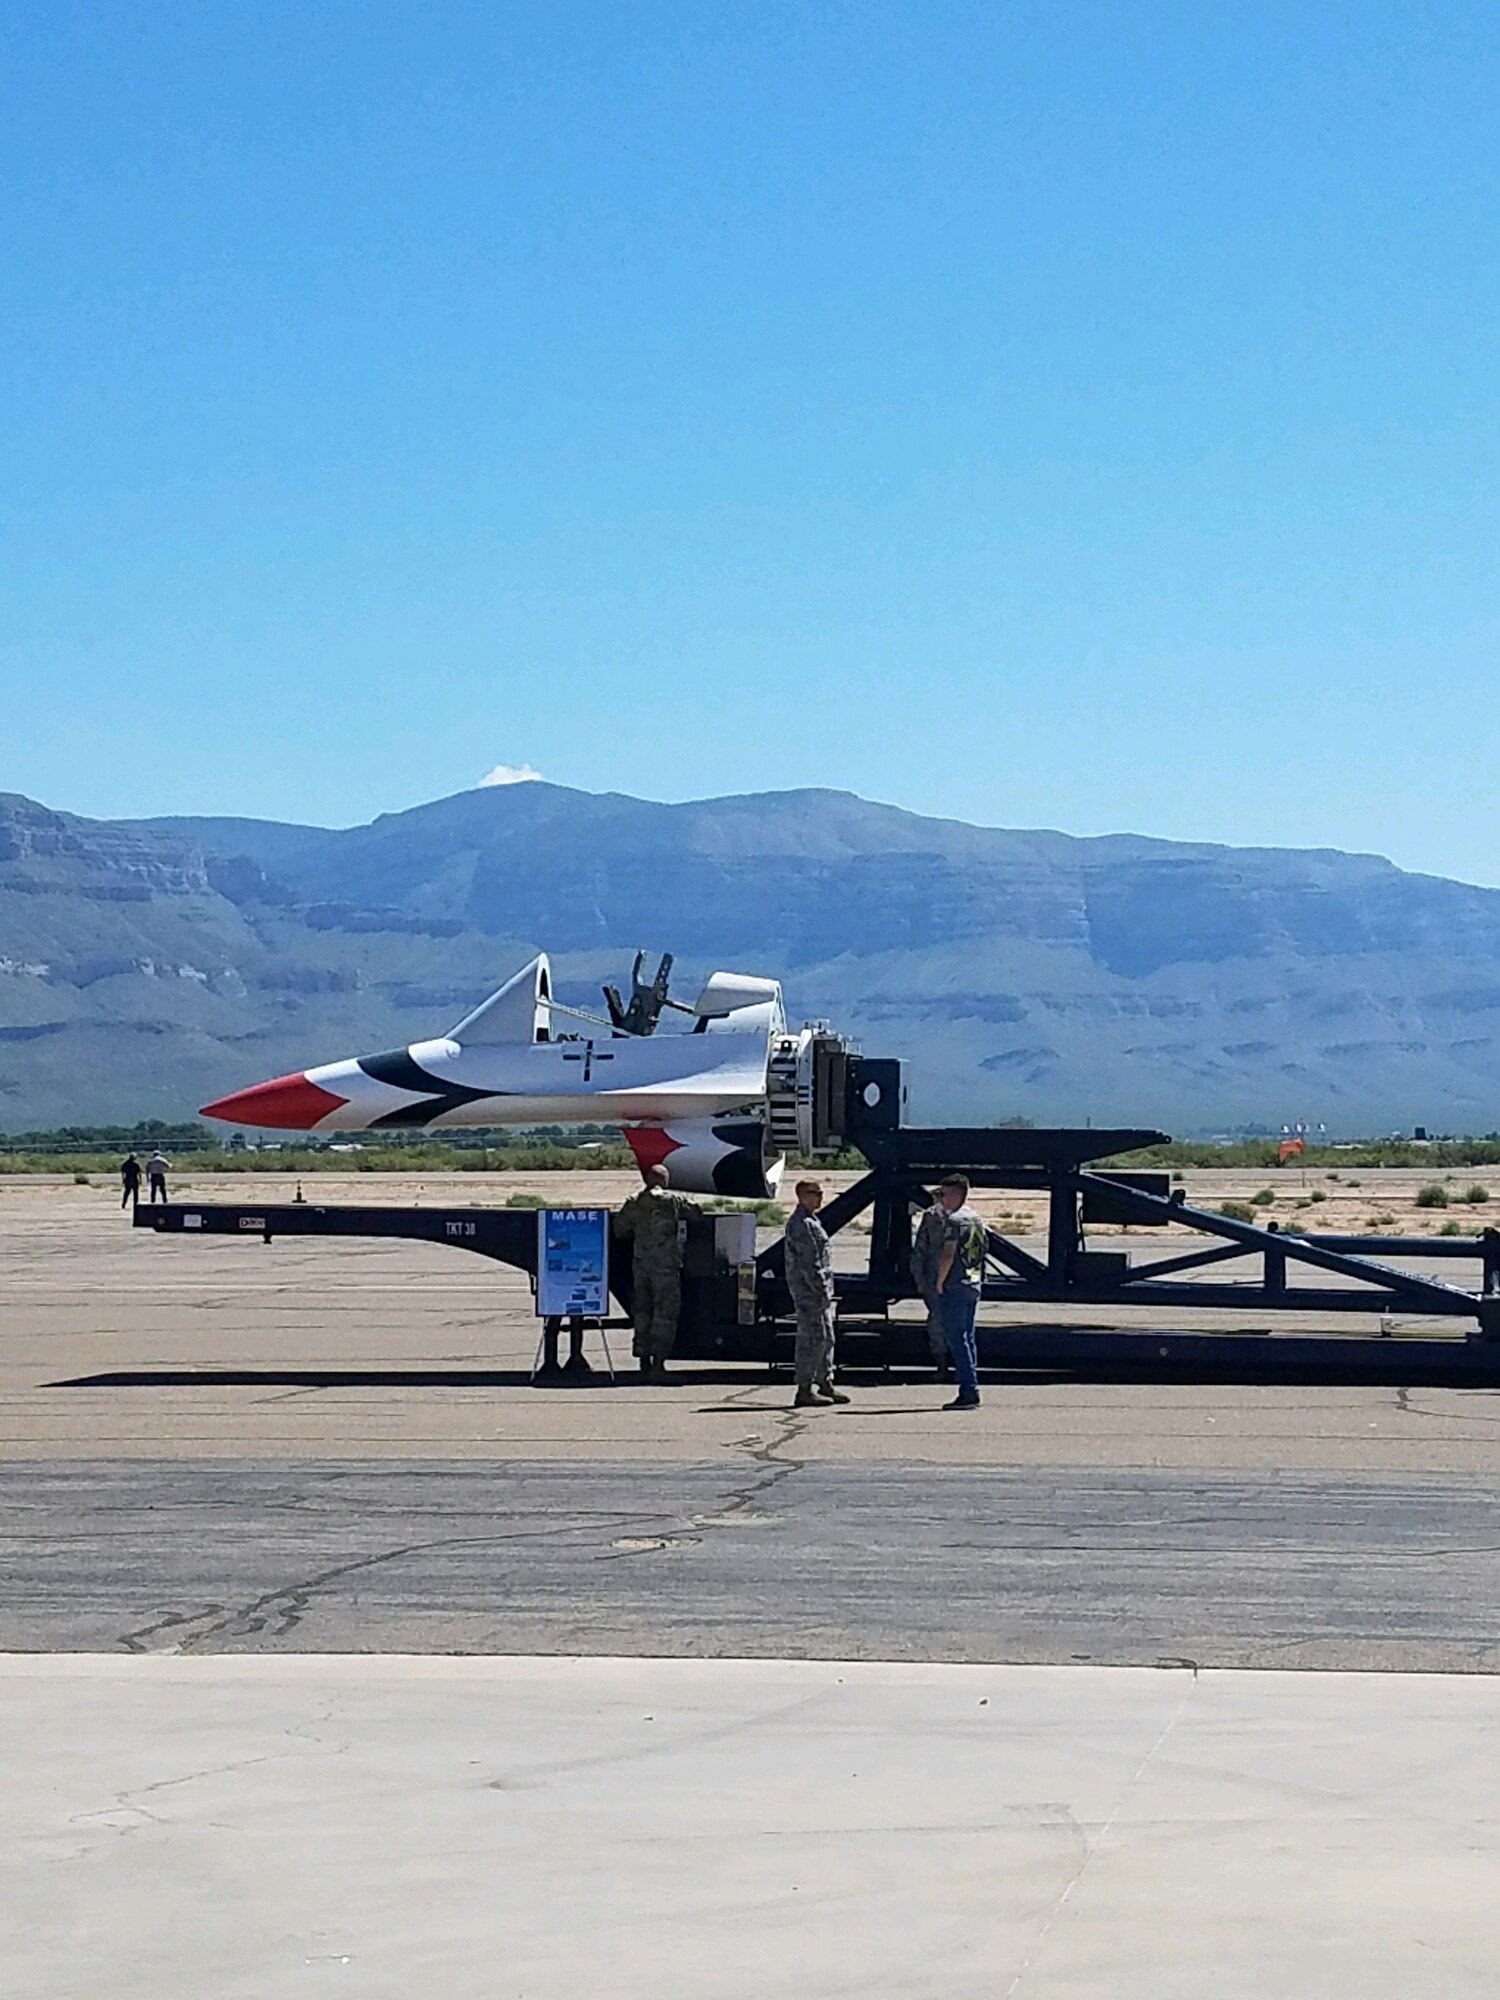 During the 2018 New Mexico Aviation Aerospace Association Career Expo, members of the 846th Test Squadron spoke to students about the F-16 Front Fuselage sled, shown here, which is used for egress testing on the Holloman High Speed Test Track. (U.S. Air Force photo)